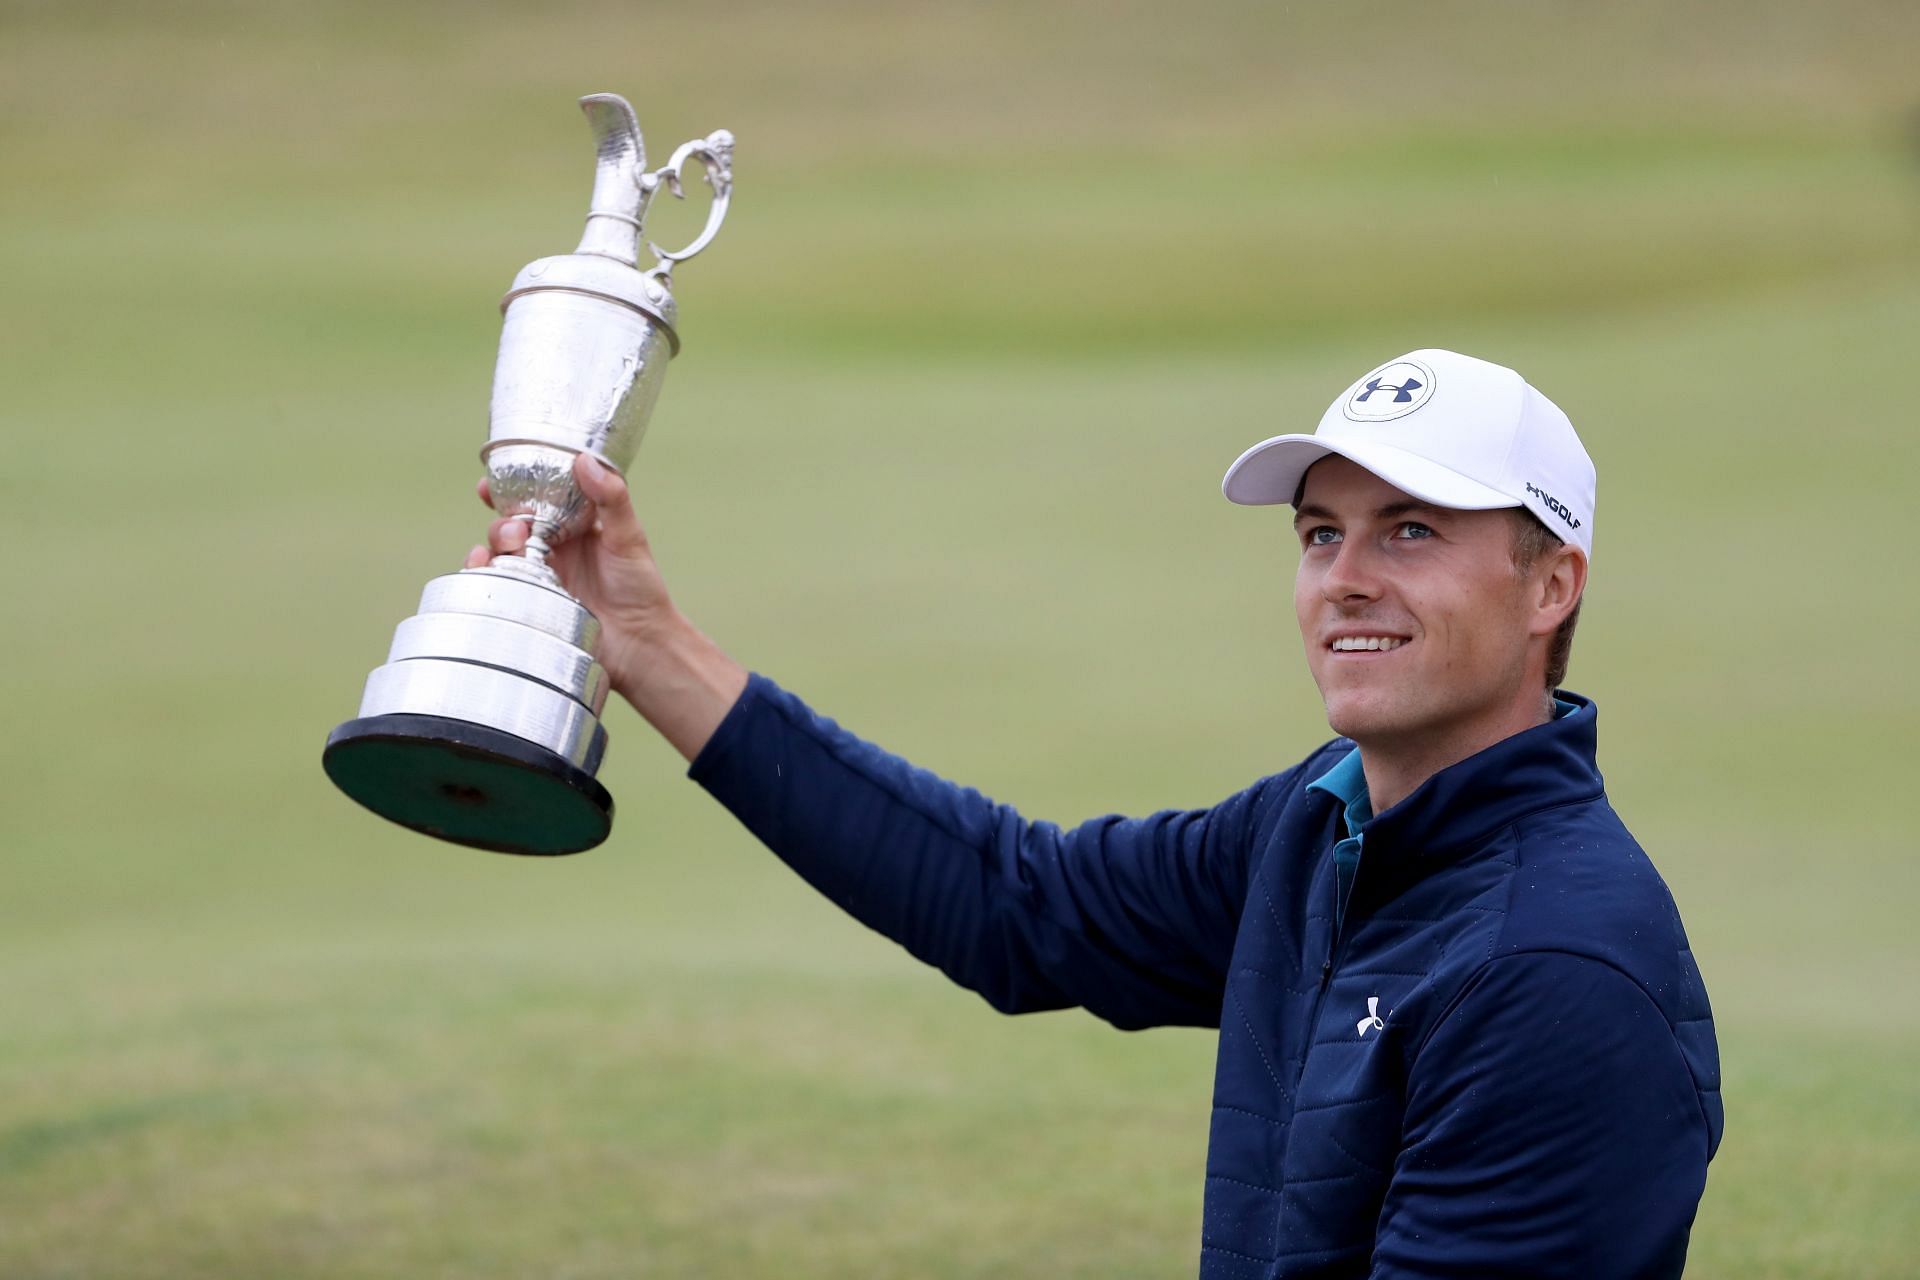 On July 23, 2017, in Southport, England, during the final round of the 146th Open Championship at Royal Birkdale, Jordan Spieth celebrates his victory by posing with the Claret Jug.